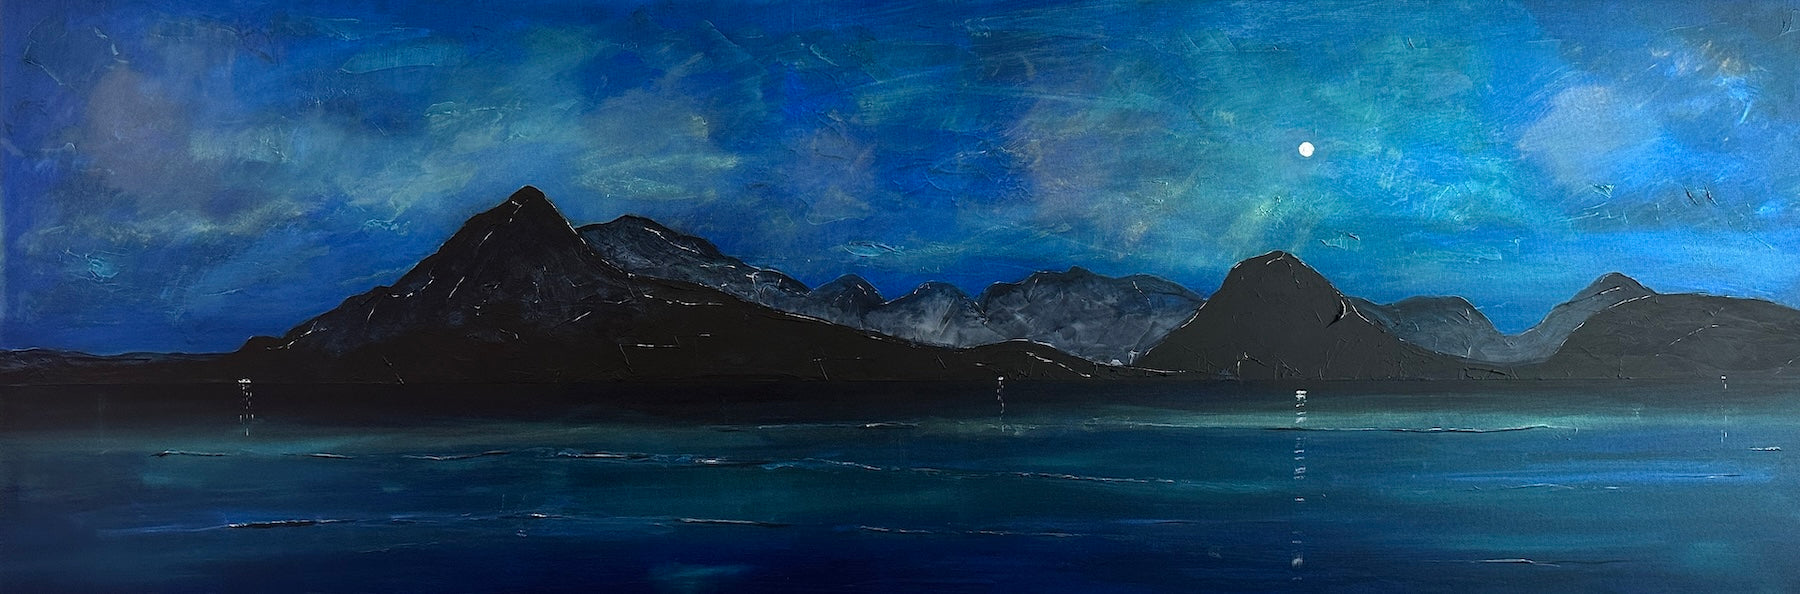 Commission request original landscape paintings from Scotland by Scottish Artist Hunter